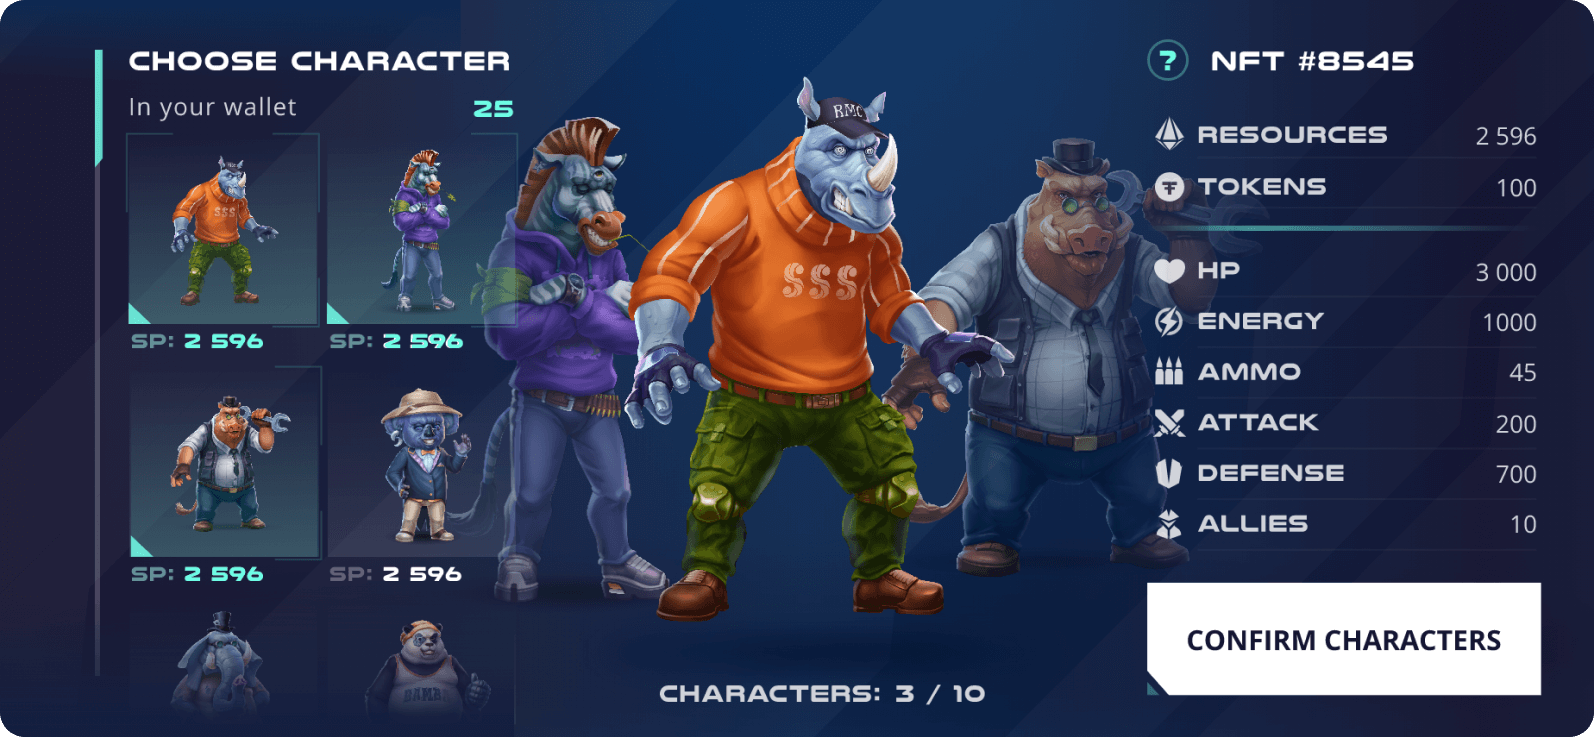 Characters design for Blockchain Game NFT Islands